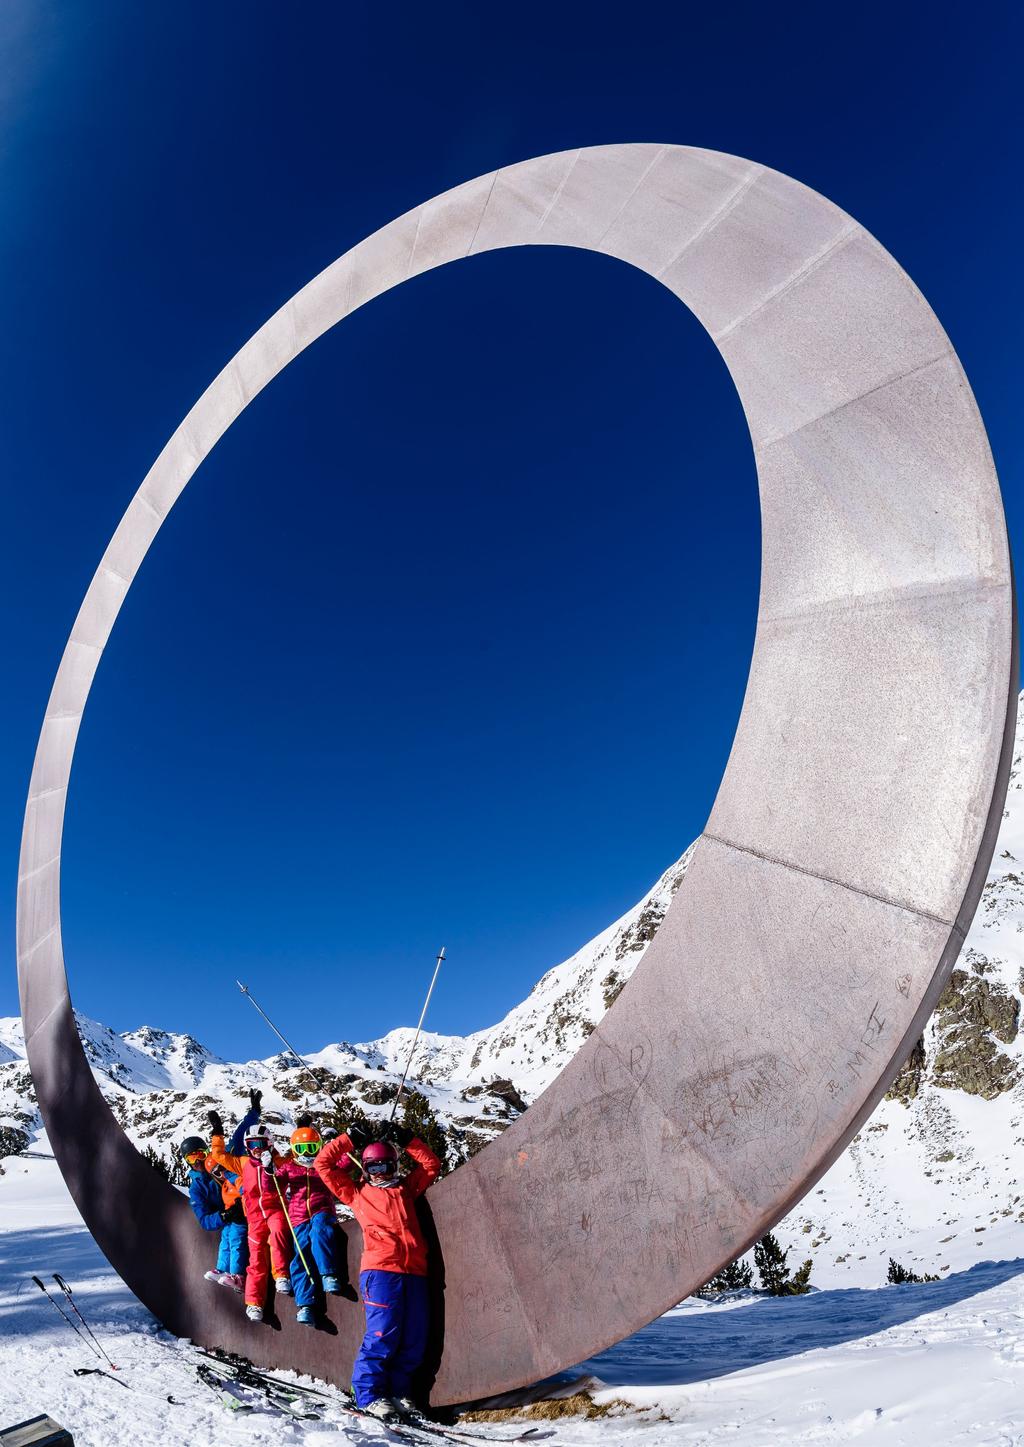 ACTIVITIES Vallnord - Ordino Arcalís provides the perfect setting for all kinds of people to try a wide range of activities, from classic snowmobile excursions to more extreme experiences such as